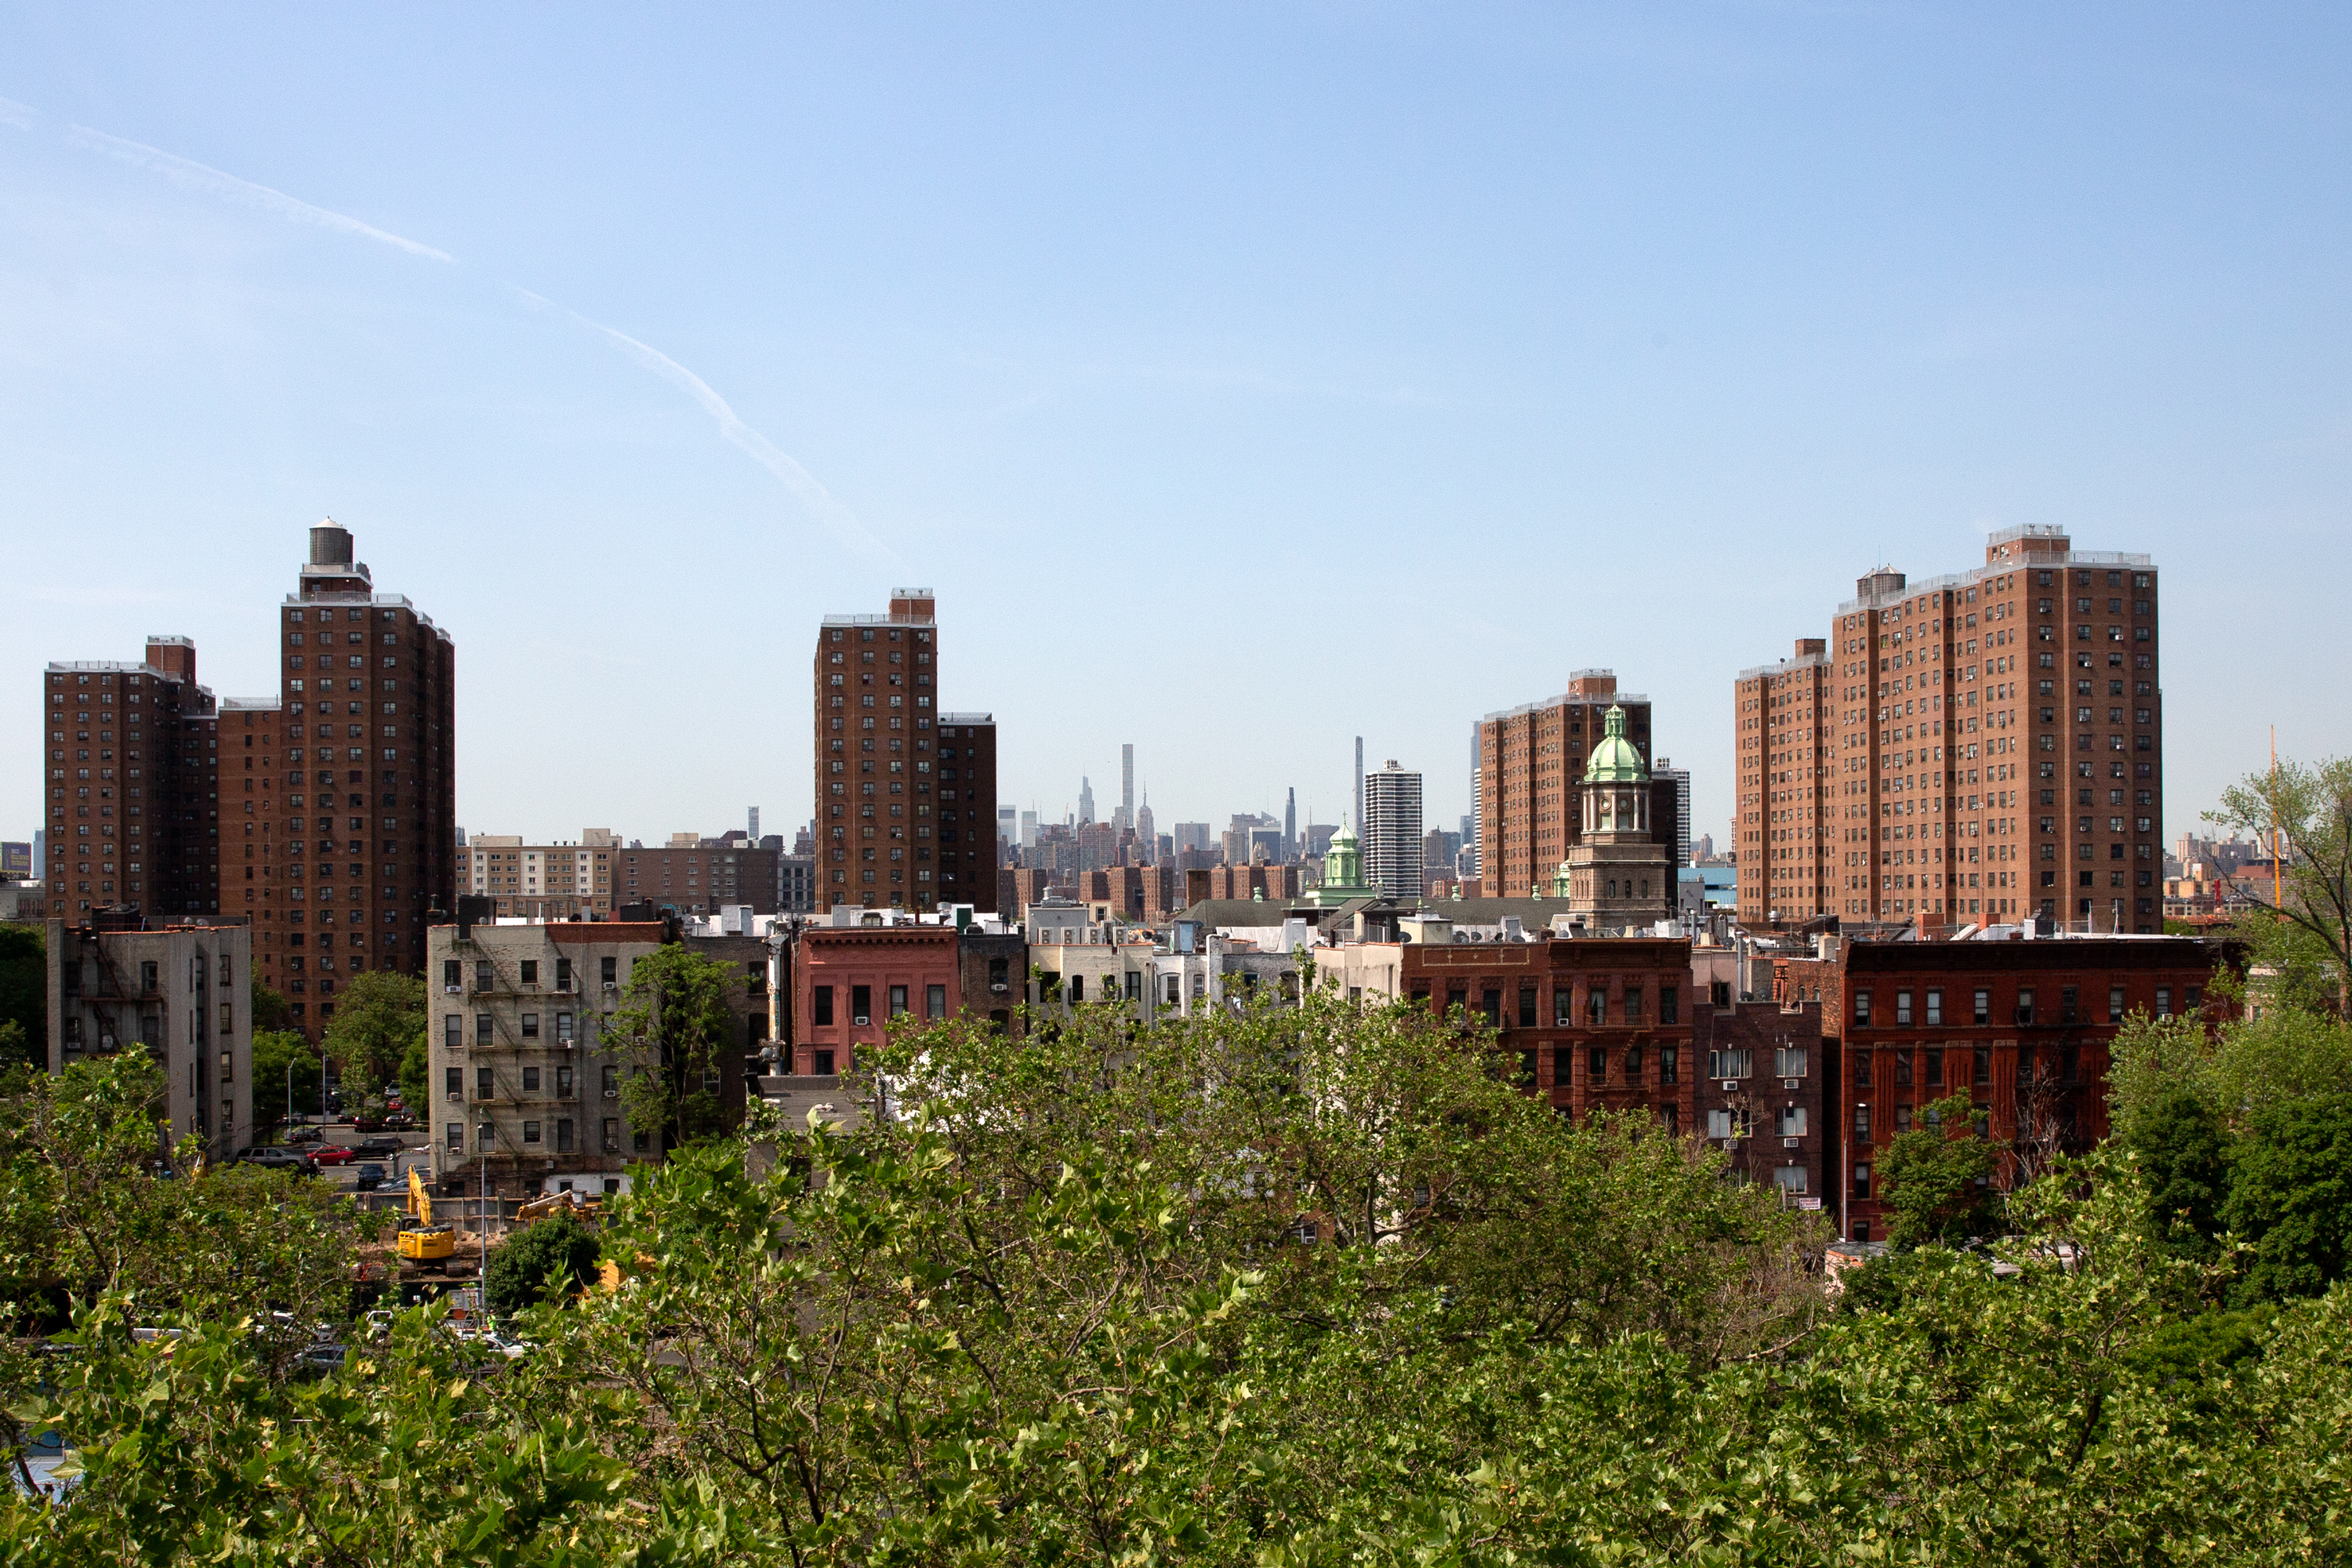 A view of Mott Haven, which has a mix of public and private residential buildings.